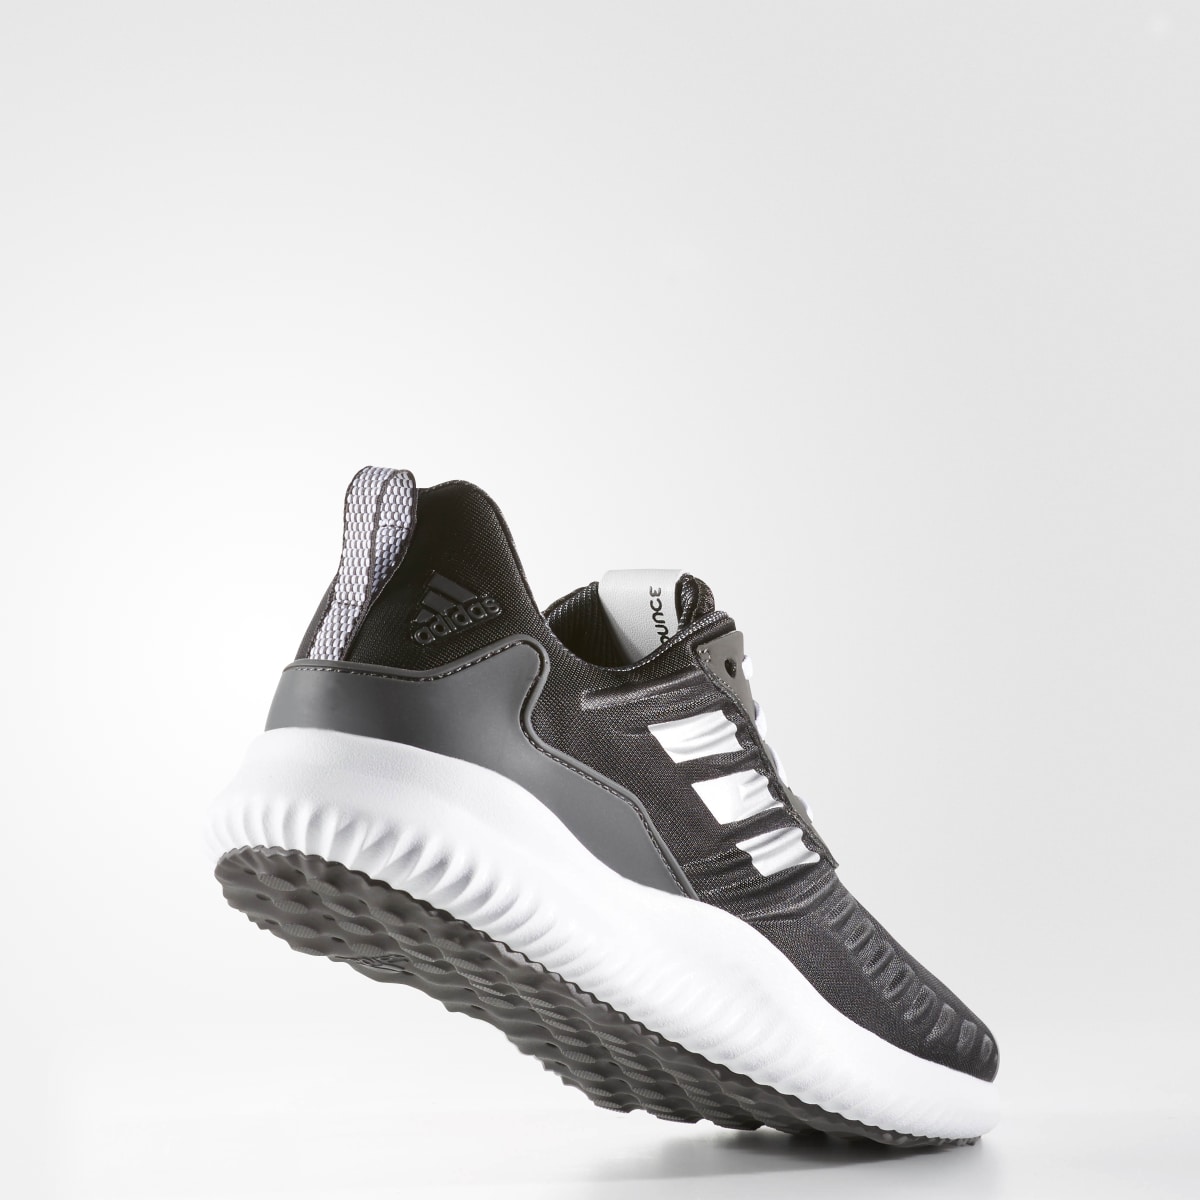 Adidas Alphabounce RC Shoes. 5